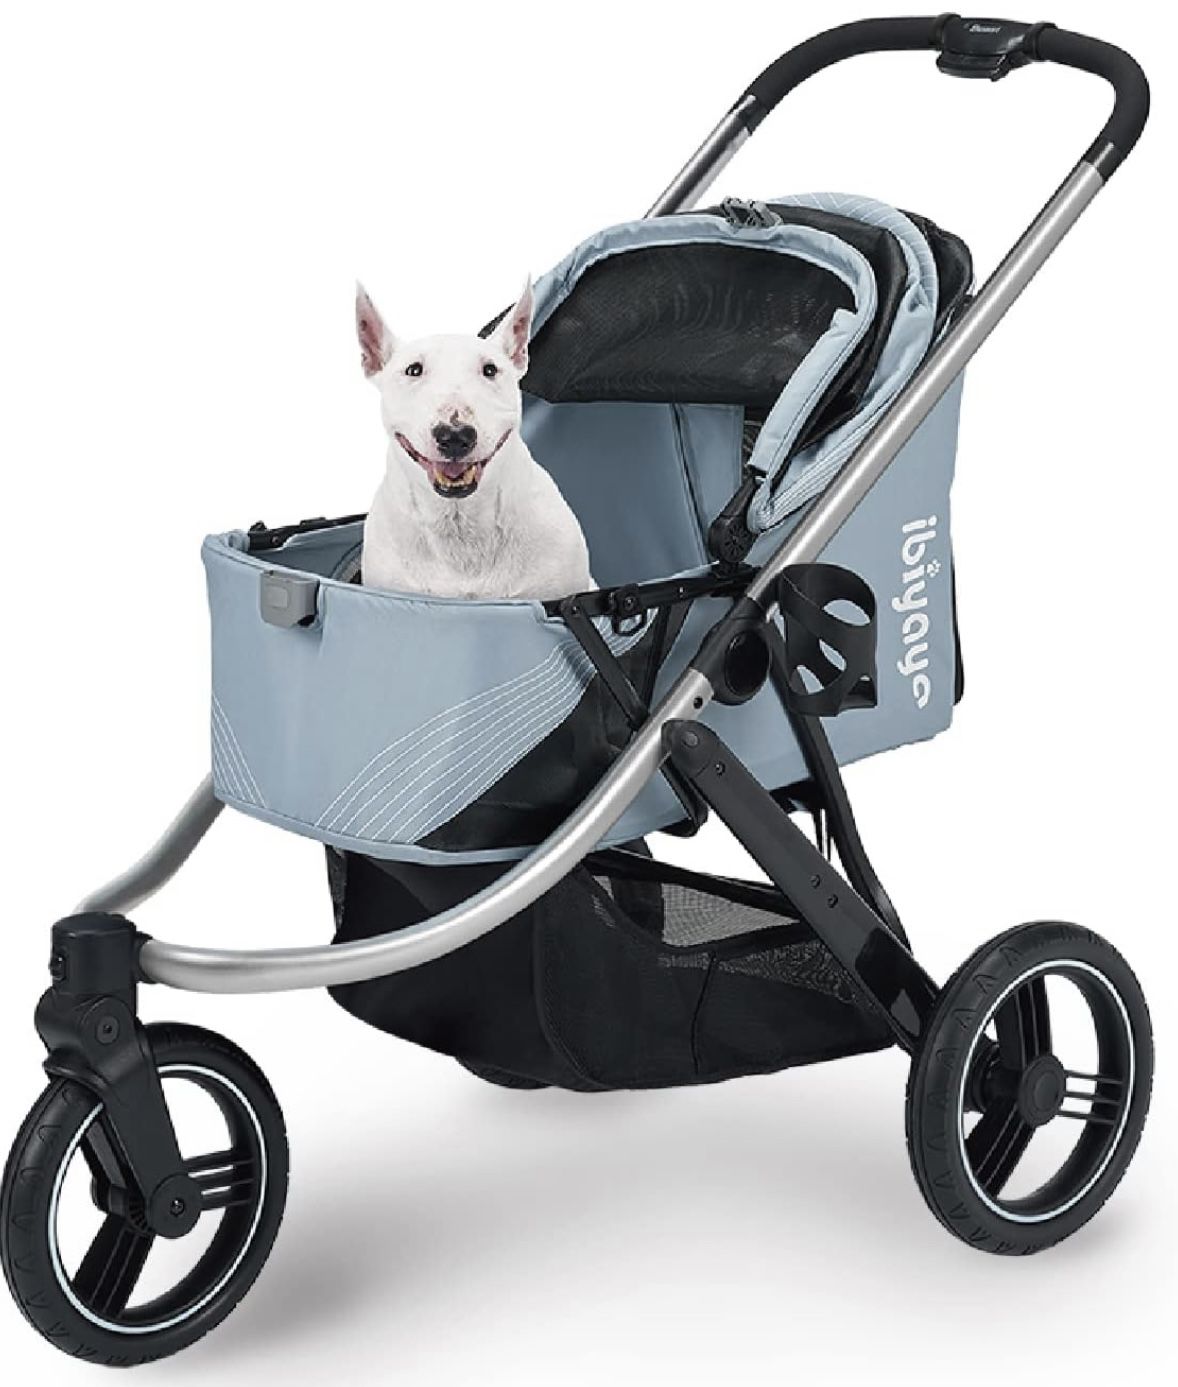 ibiyaya - The Beast Dog Stroller for All-Terrain Jogging - Small and Medium Dog and Cat Stroller, 3 Wheel Dog Carrier with Double Breaks, Zipperless D